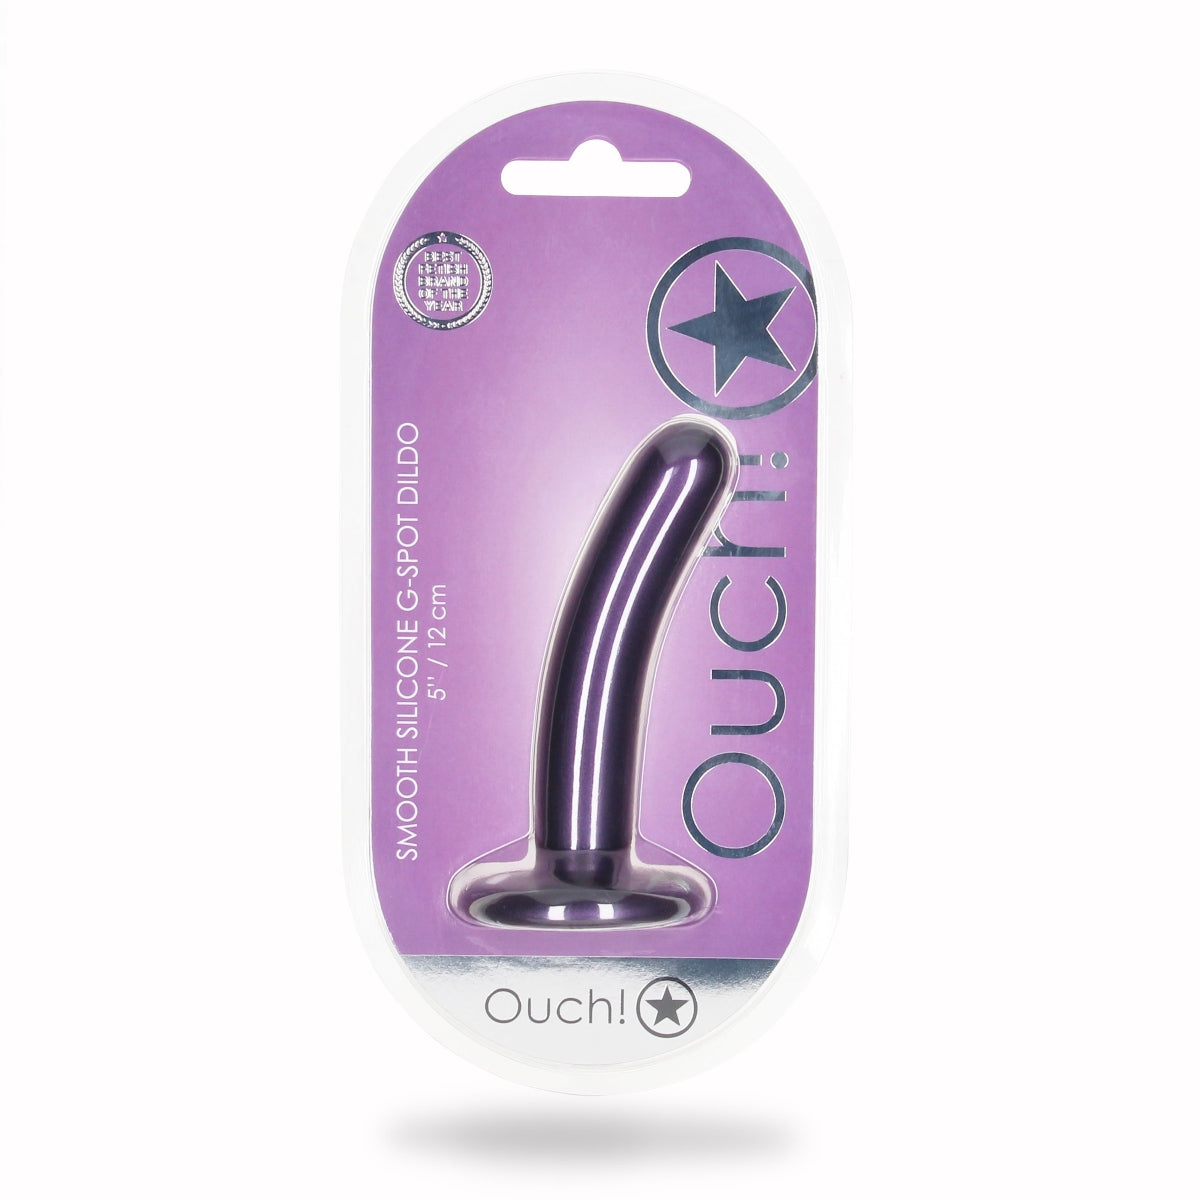 Ouch Smooth Silicone G Spot Dildo 5inch Metallic Purple